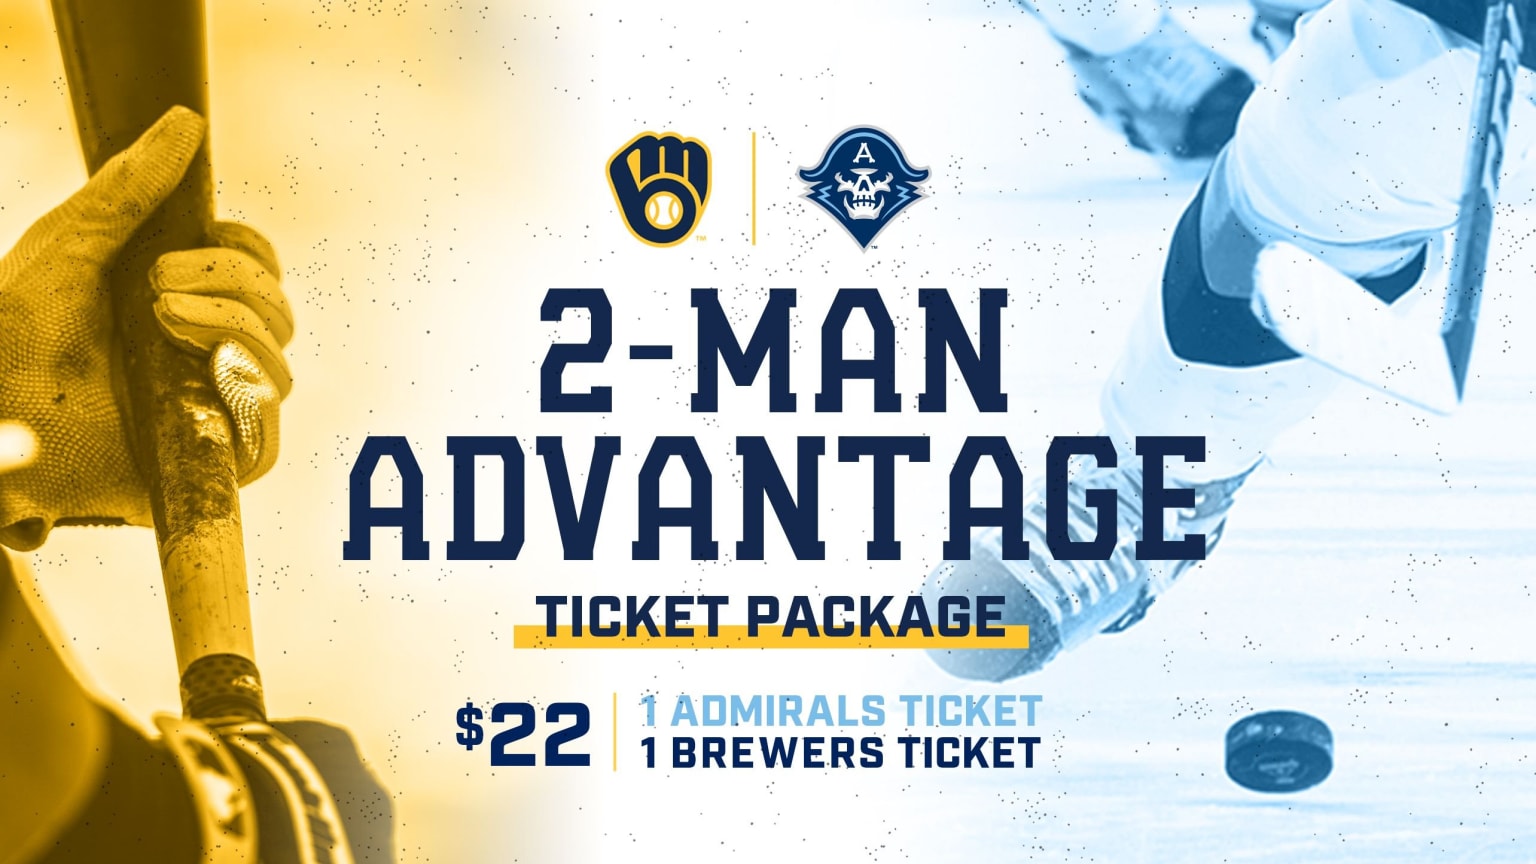 Milwaukee Admirals - Be on your own 2-man advantage! Get a Milwaukee Brewers  ticket and an Admirals ticket for just $22! Log onto brewers.com/admirals  to get yours today!